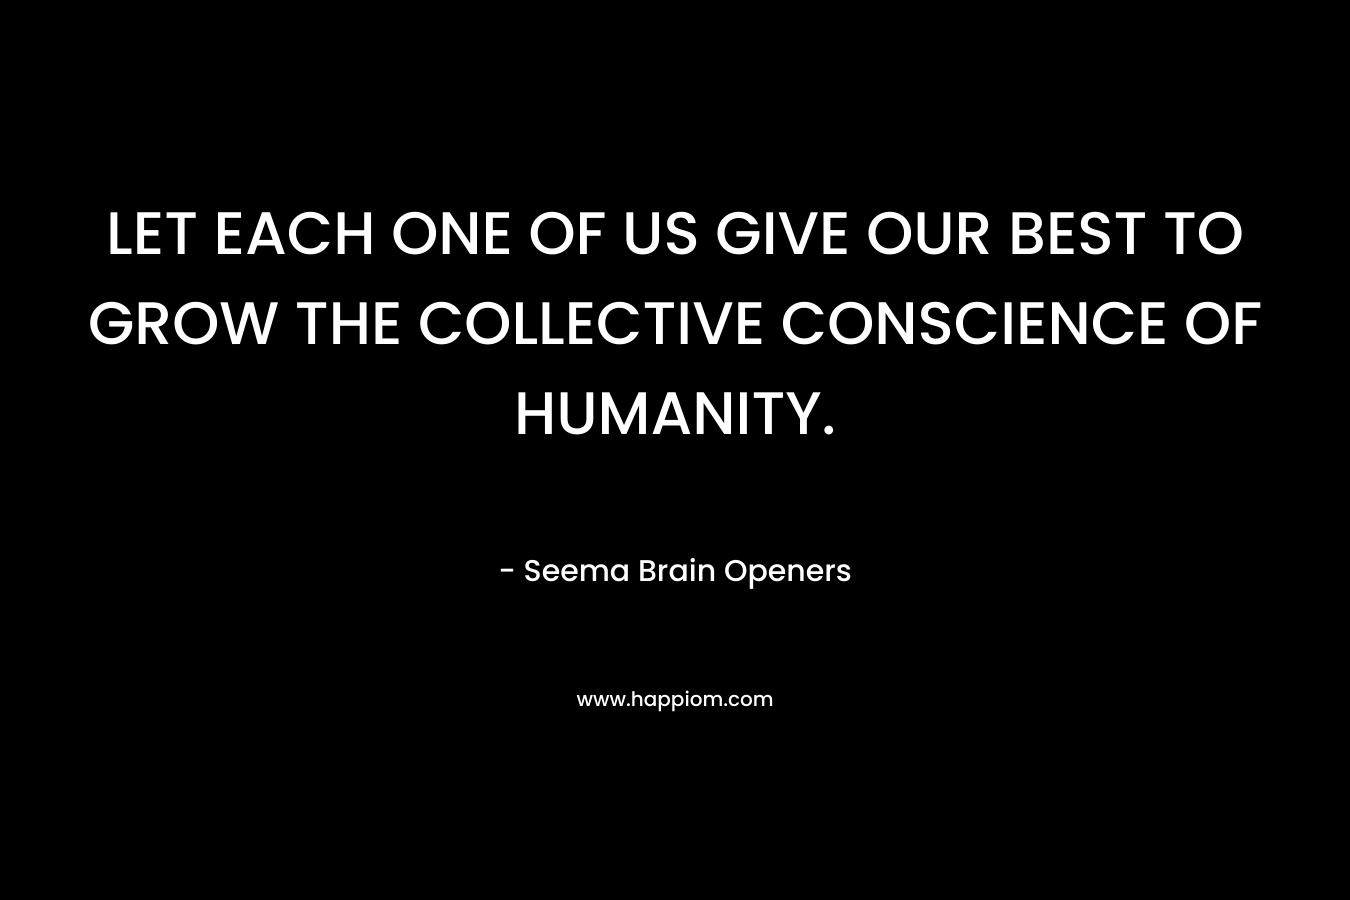 LET EACH ONE OF US GIVE OUR BEST TO GROW THE COLLECTIVE CONSCIENCE OF HUMANITY. – Seema Brain Openers